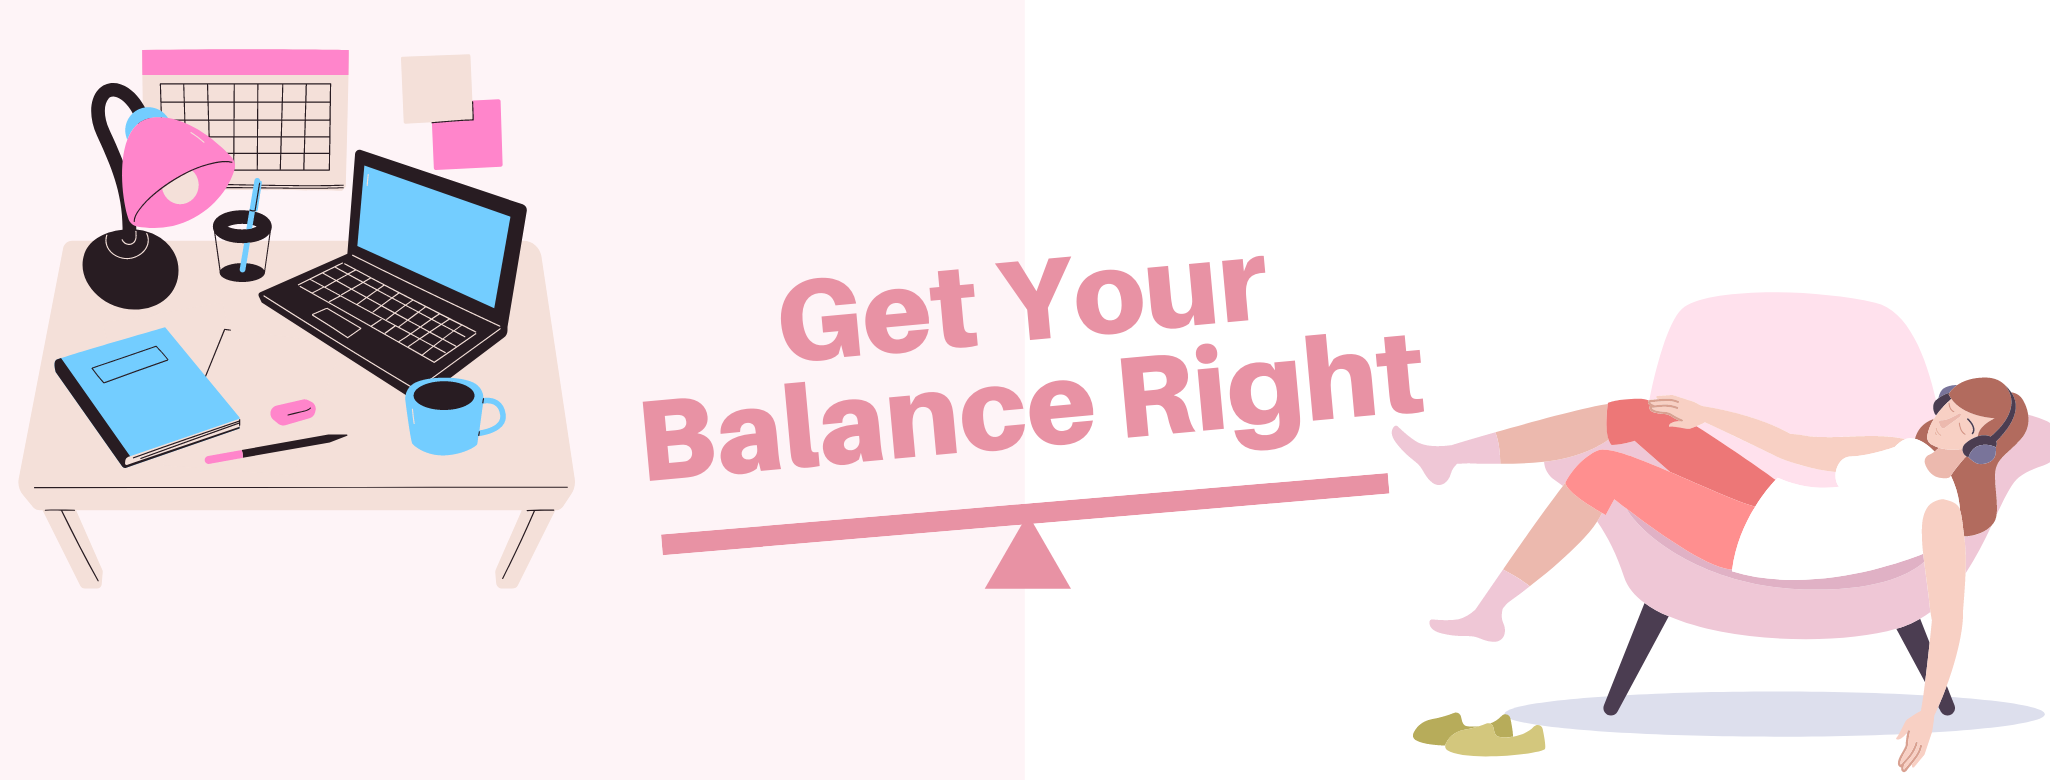 Get Your Balance Right!